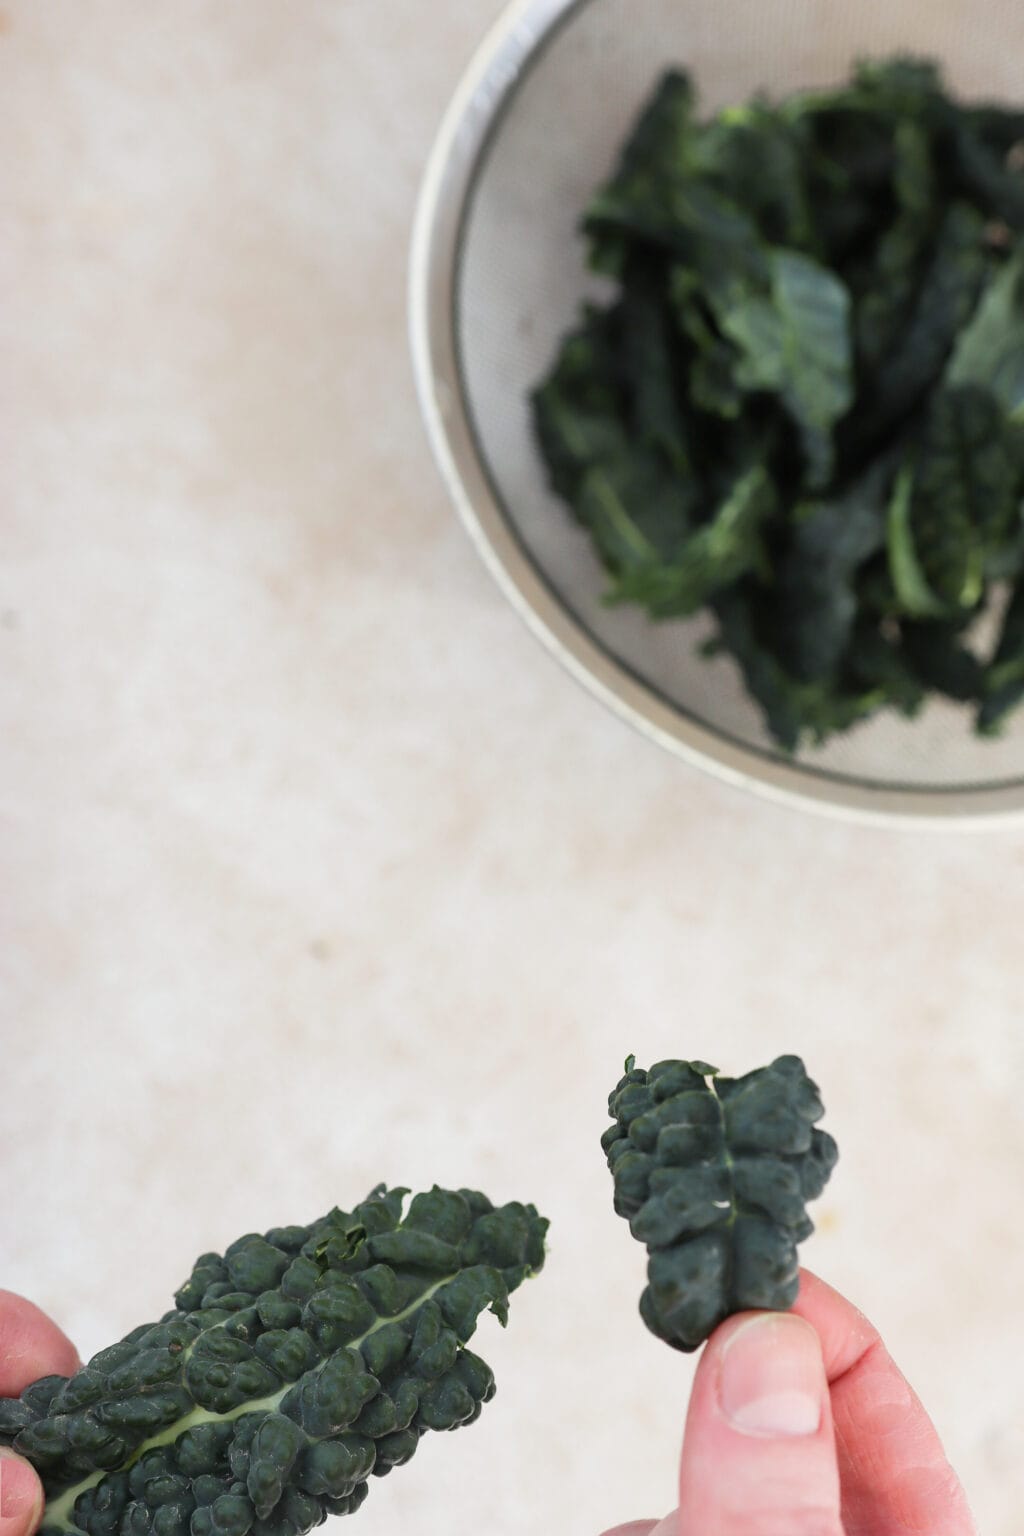 A hand is holding a torn piece of dino kale. In the background is a blurred image of a silver mesh strainer with more dino kale in it. 